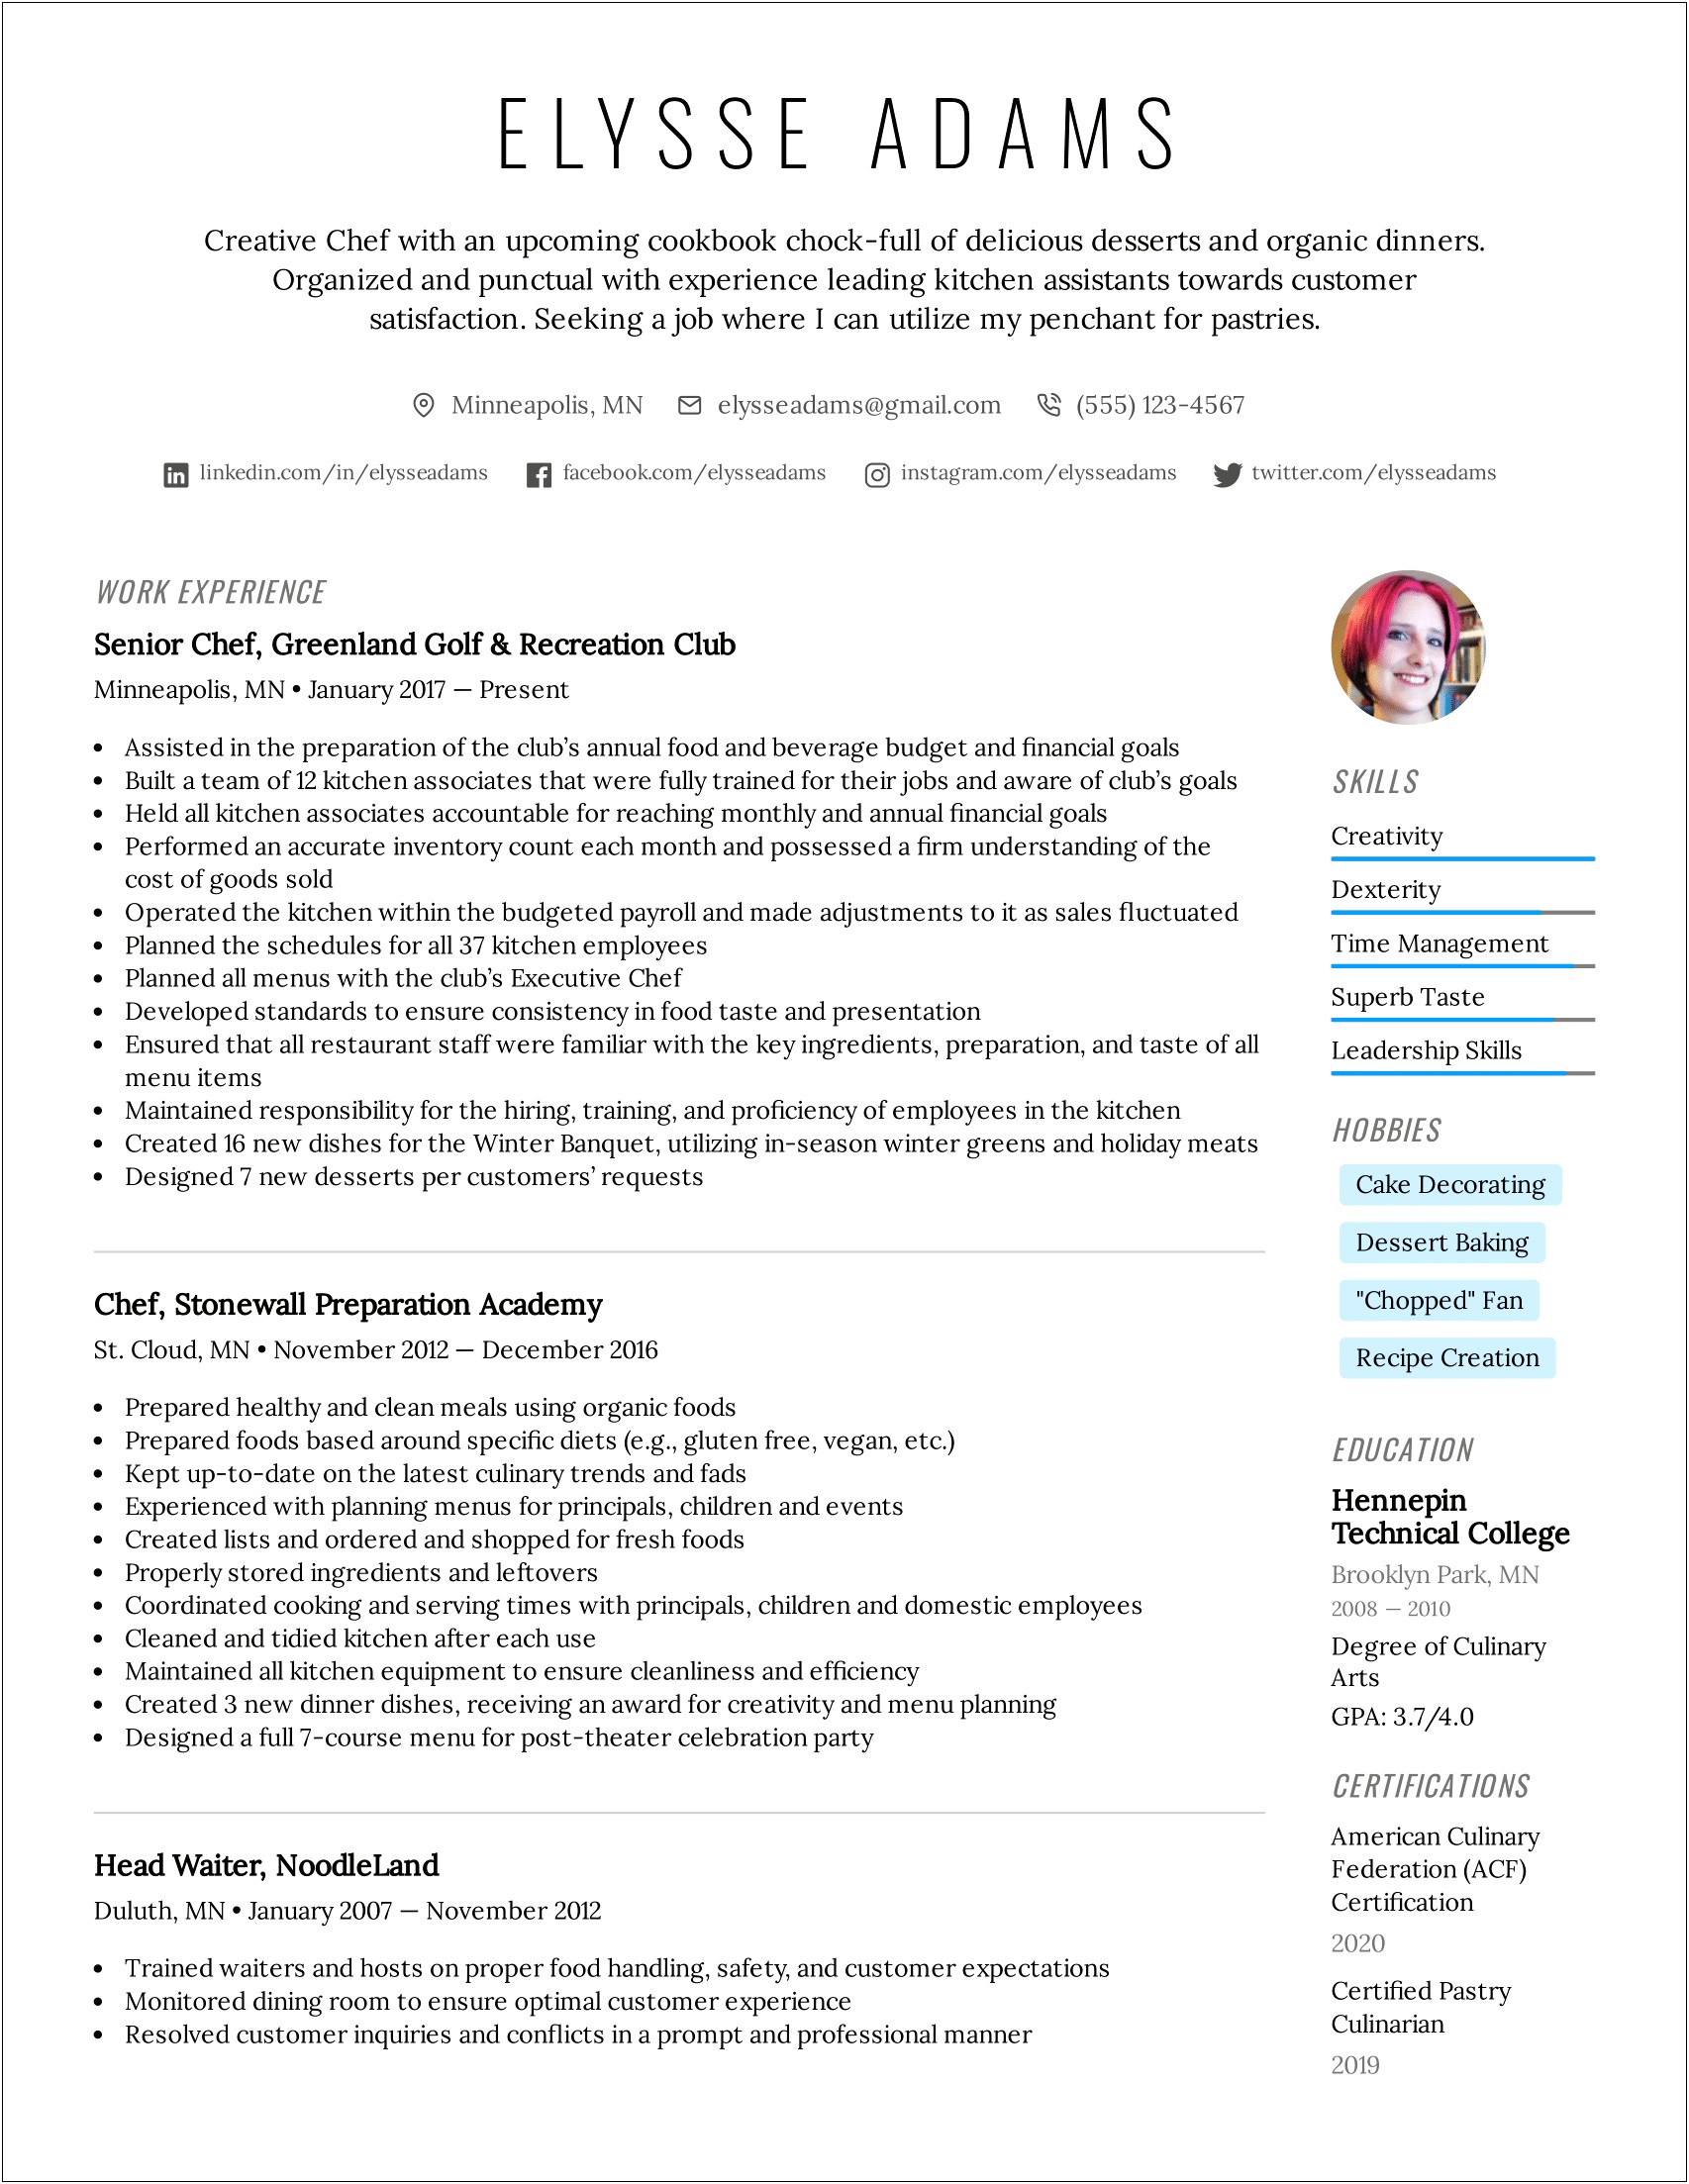 Self Employed Cake Decorator Experience In A Resume